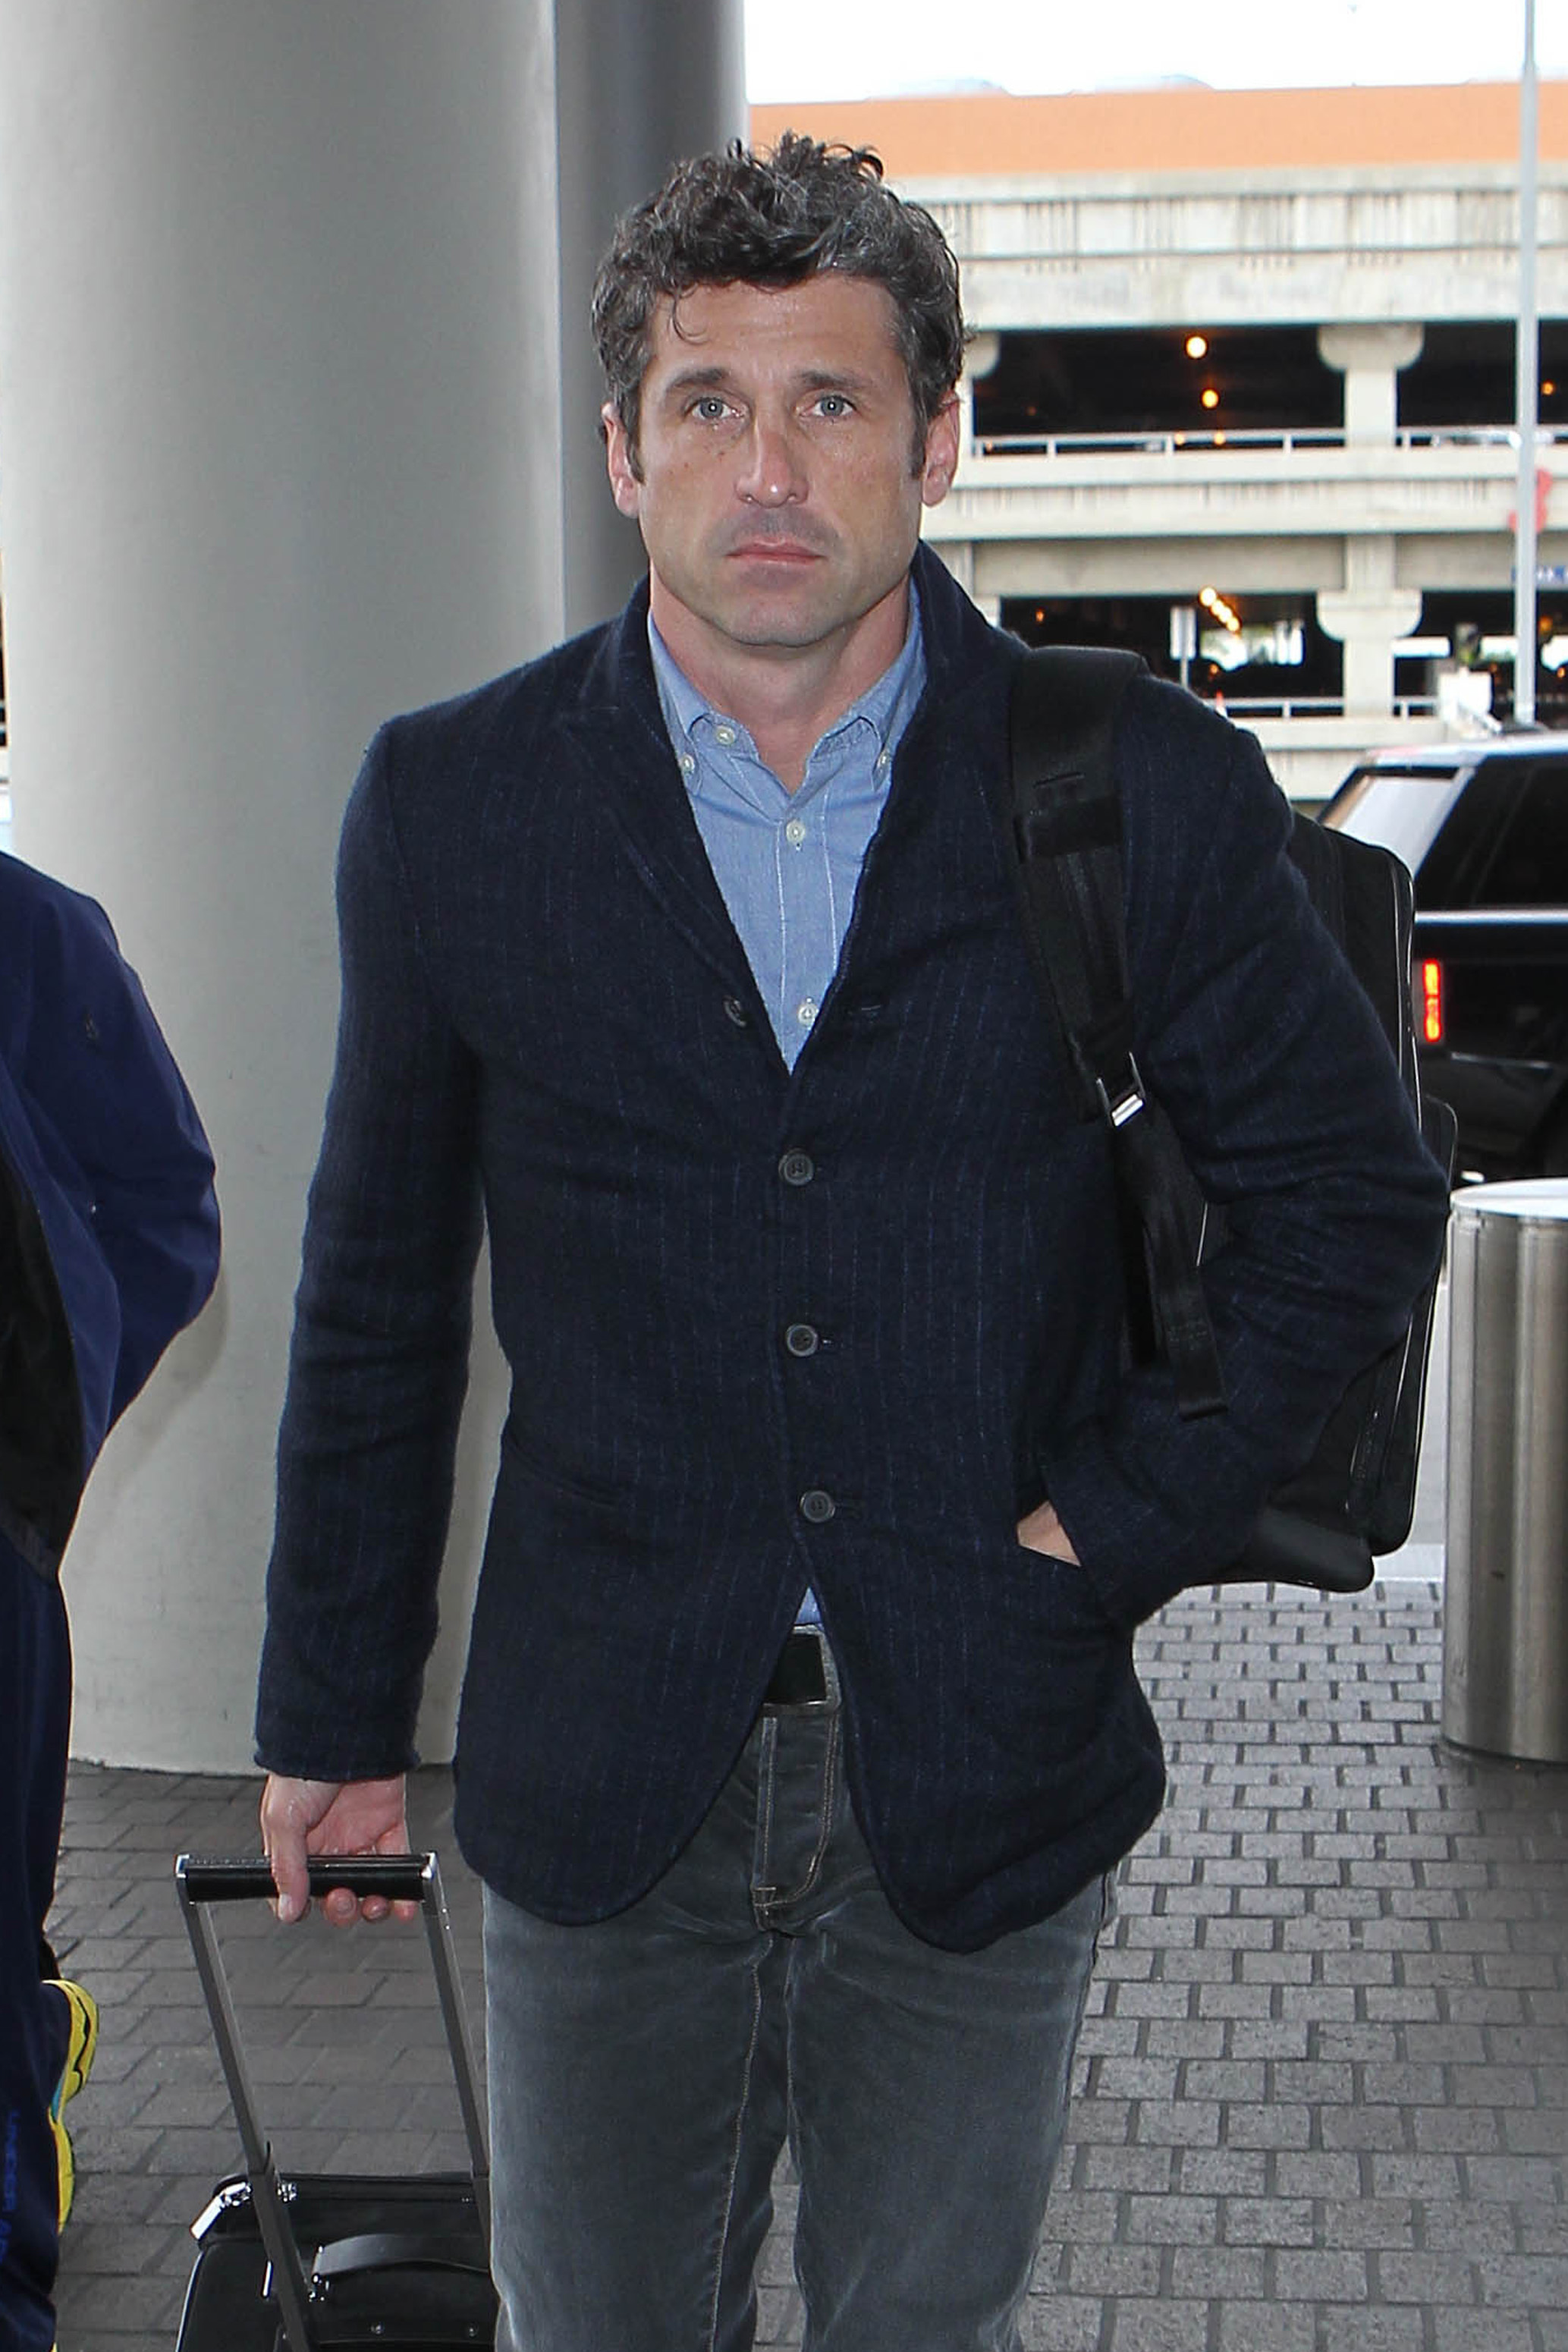 LOS ANGELES, CA - DECEMBER 11: Patrick Dempsey seen at LAX on December 11, 2014 in Los Angeles, California.  (Photo by GVK/Bauer-Griffin/GC Images)